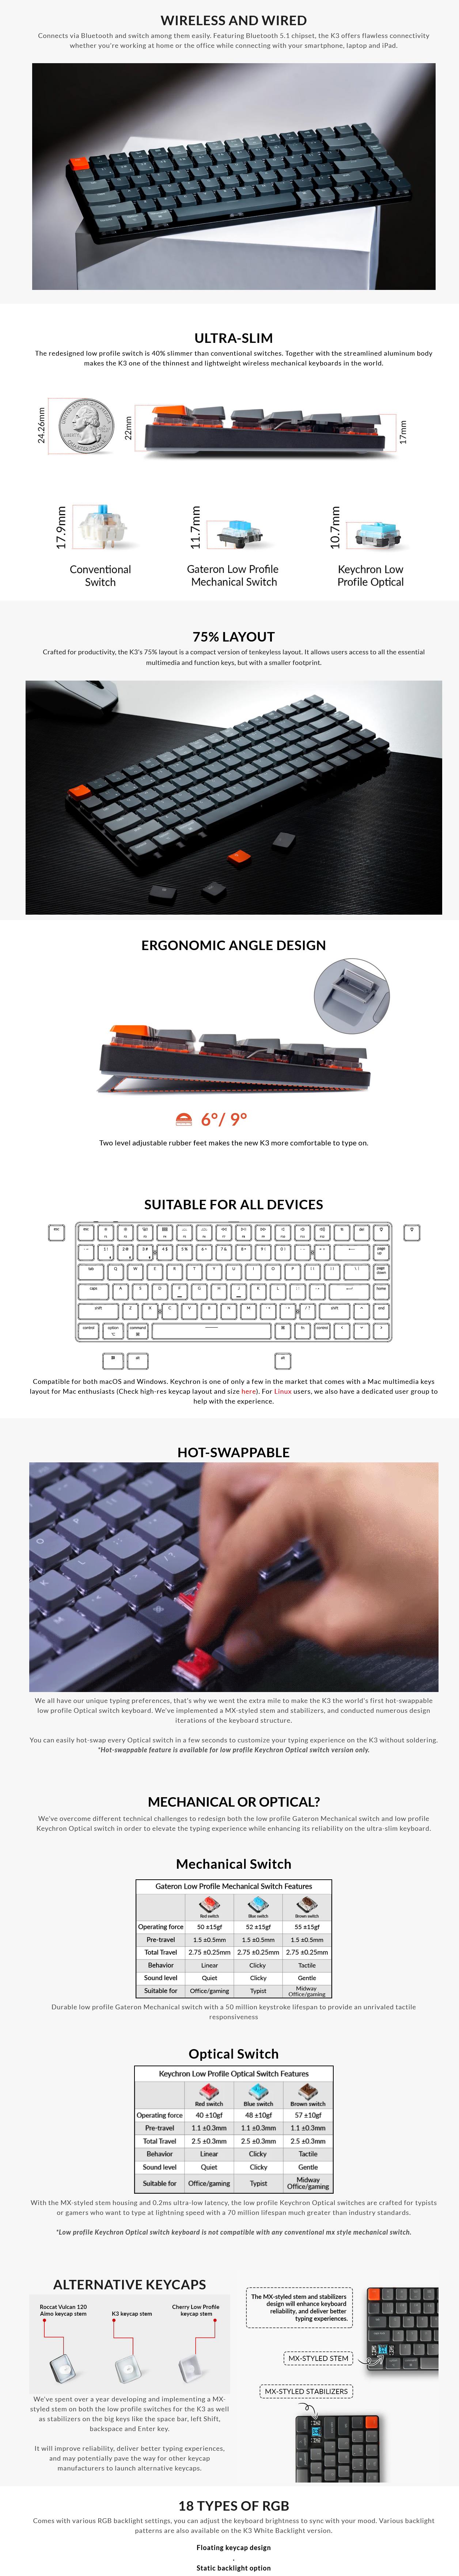 A large marketing image providing additional information about the product Keychron K3v2 Slim RGB Wireless Mechanical Keyboard (Optical Red Switch) - Additional alt info not provided